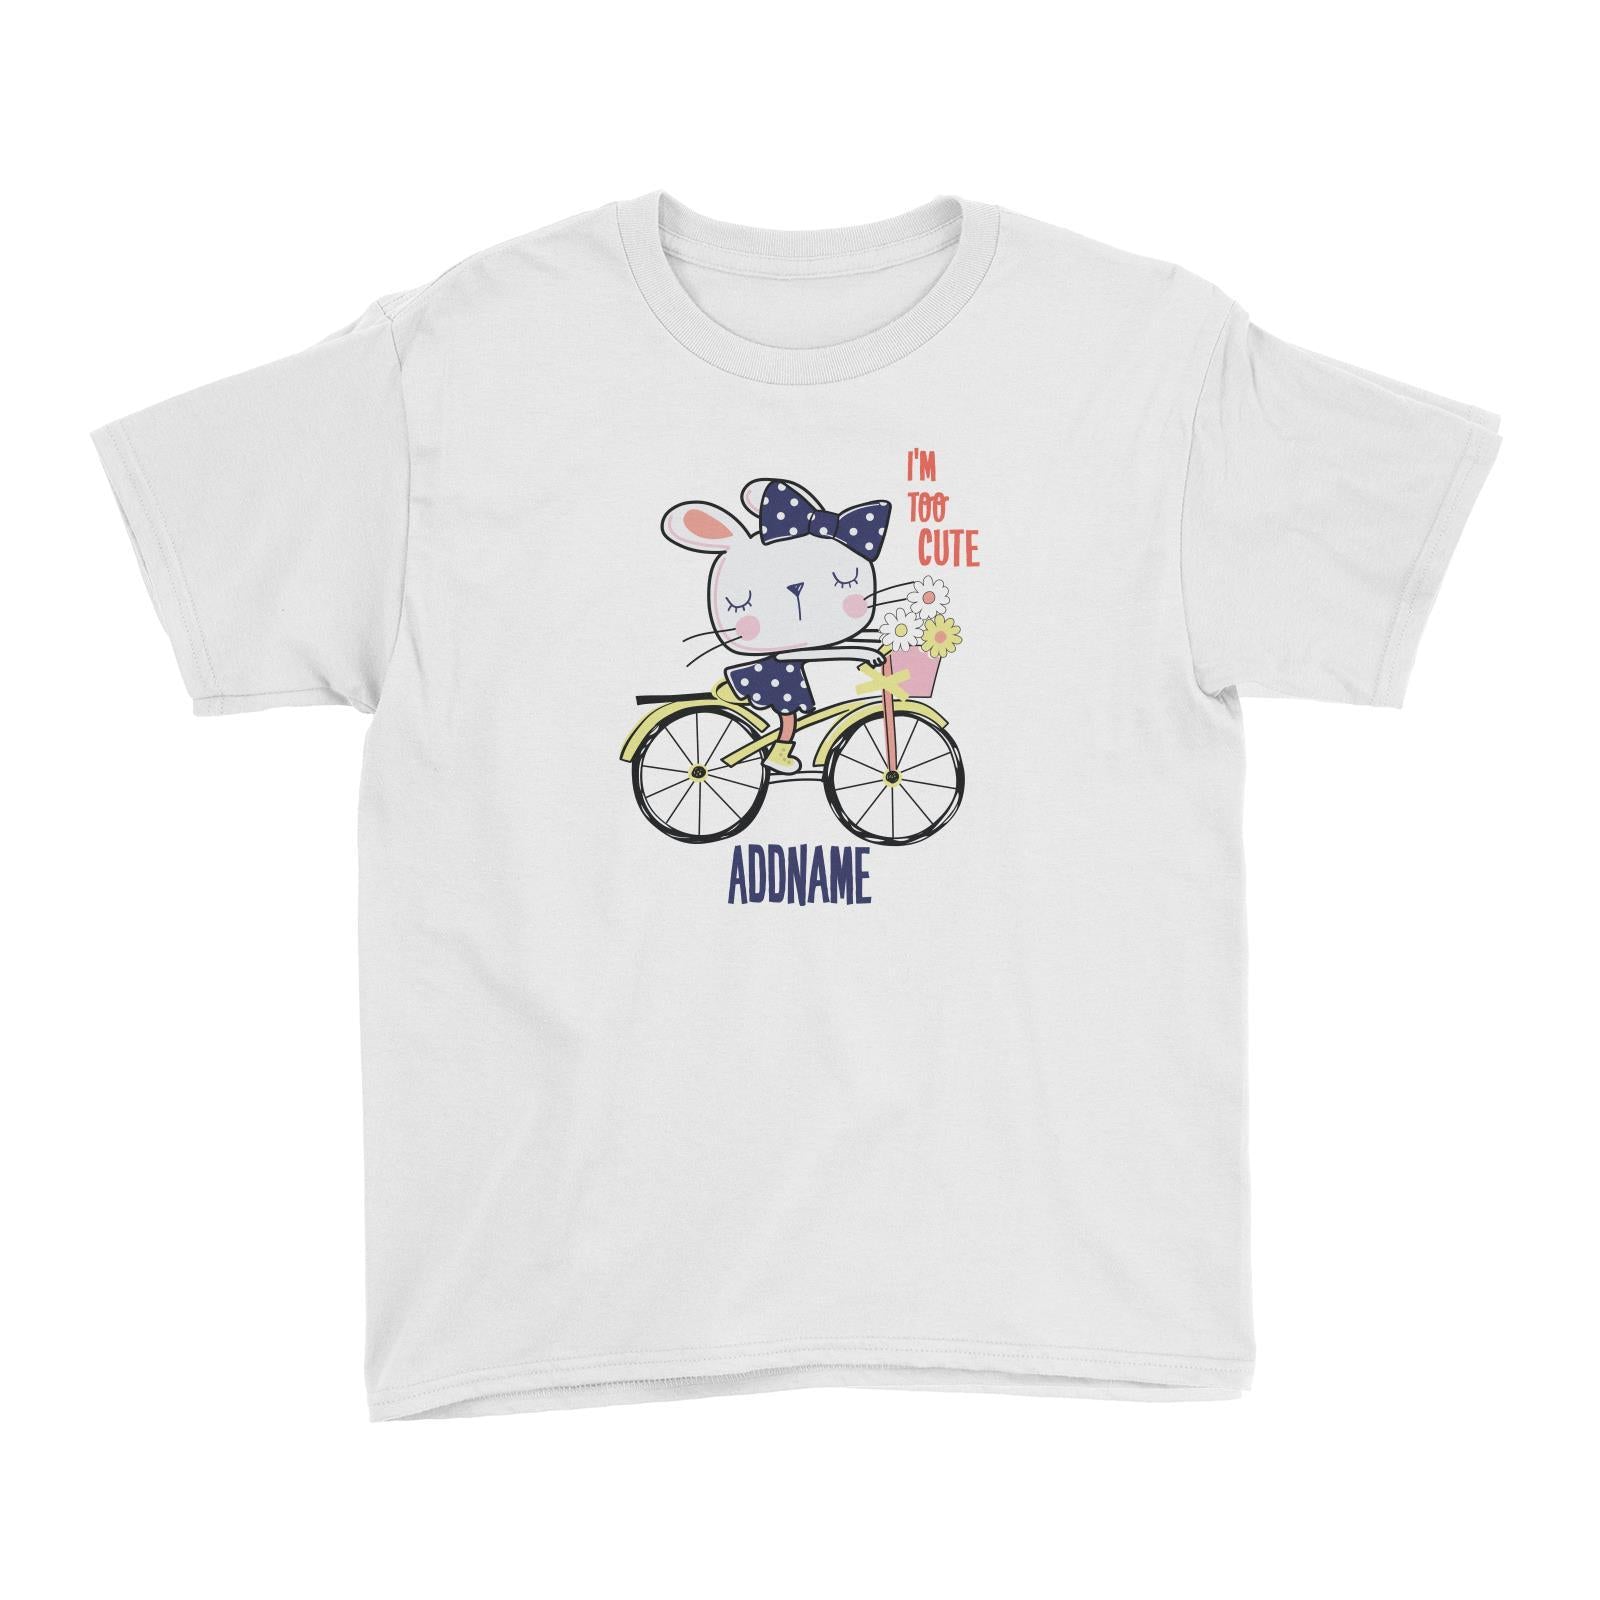 Cool Vibrant Series I'm Too Cute Bunny on Bicycle Addname Kid's T-Shirt